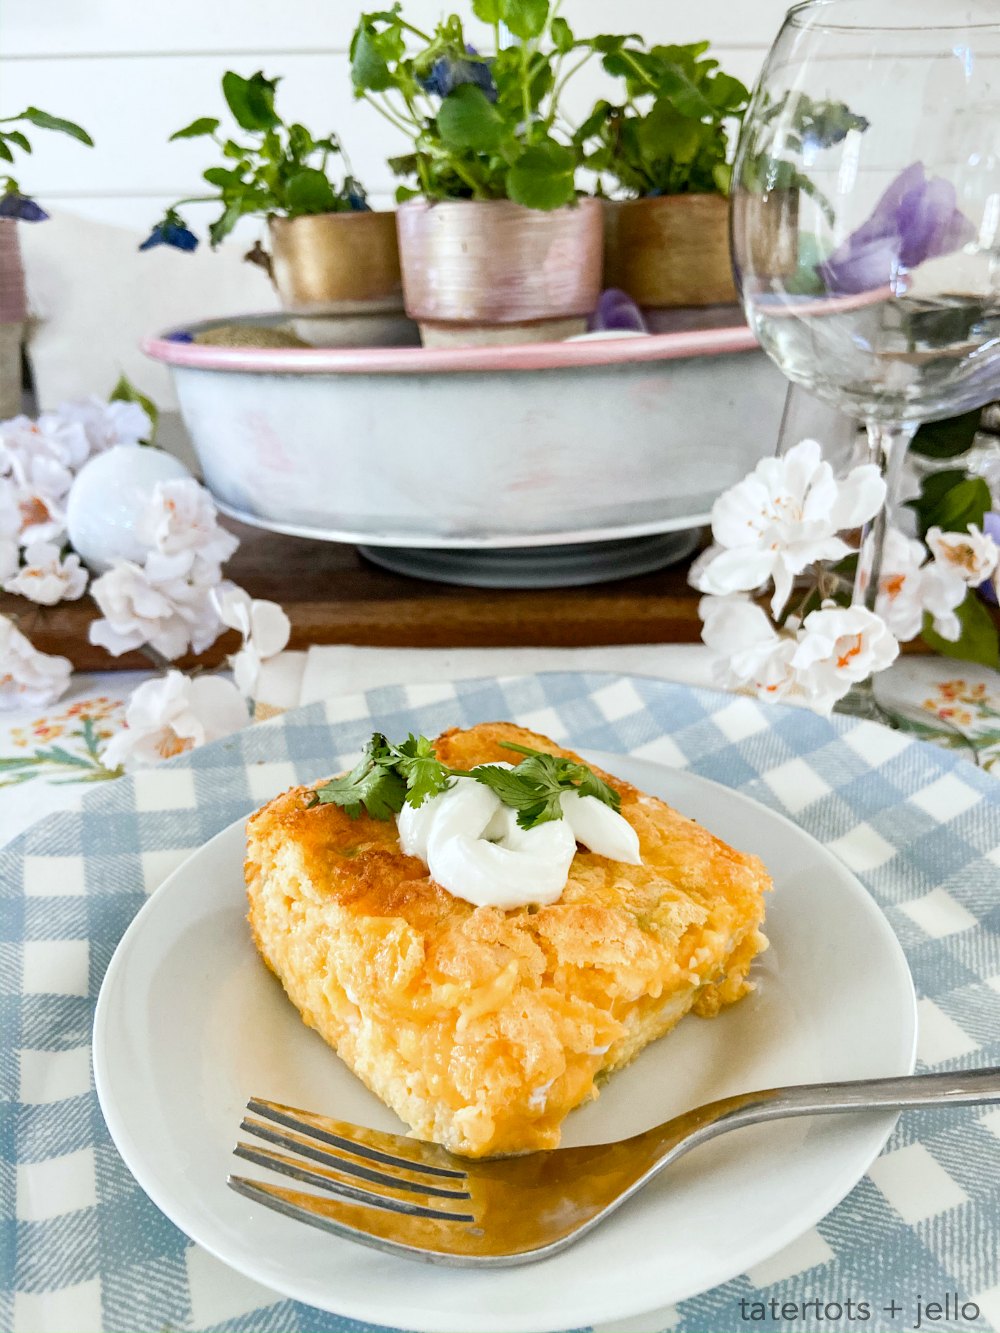 Mom's Classic Green Chili Egg Casserole. Whip up this classic, light and fluffy egg casserole with just a the perfect combination of cheese and tangy green chilis. 